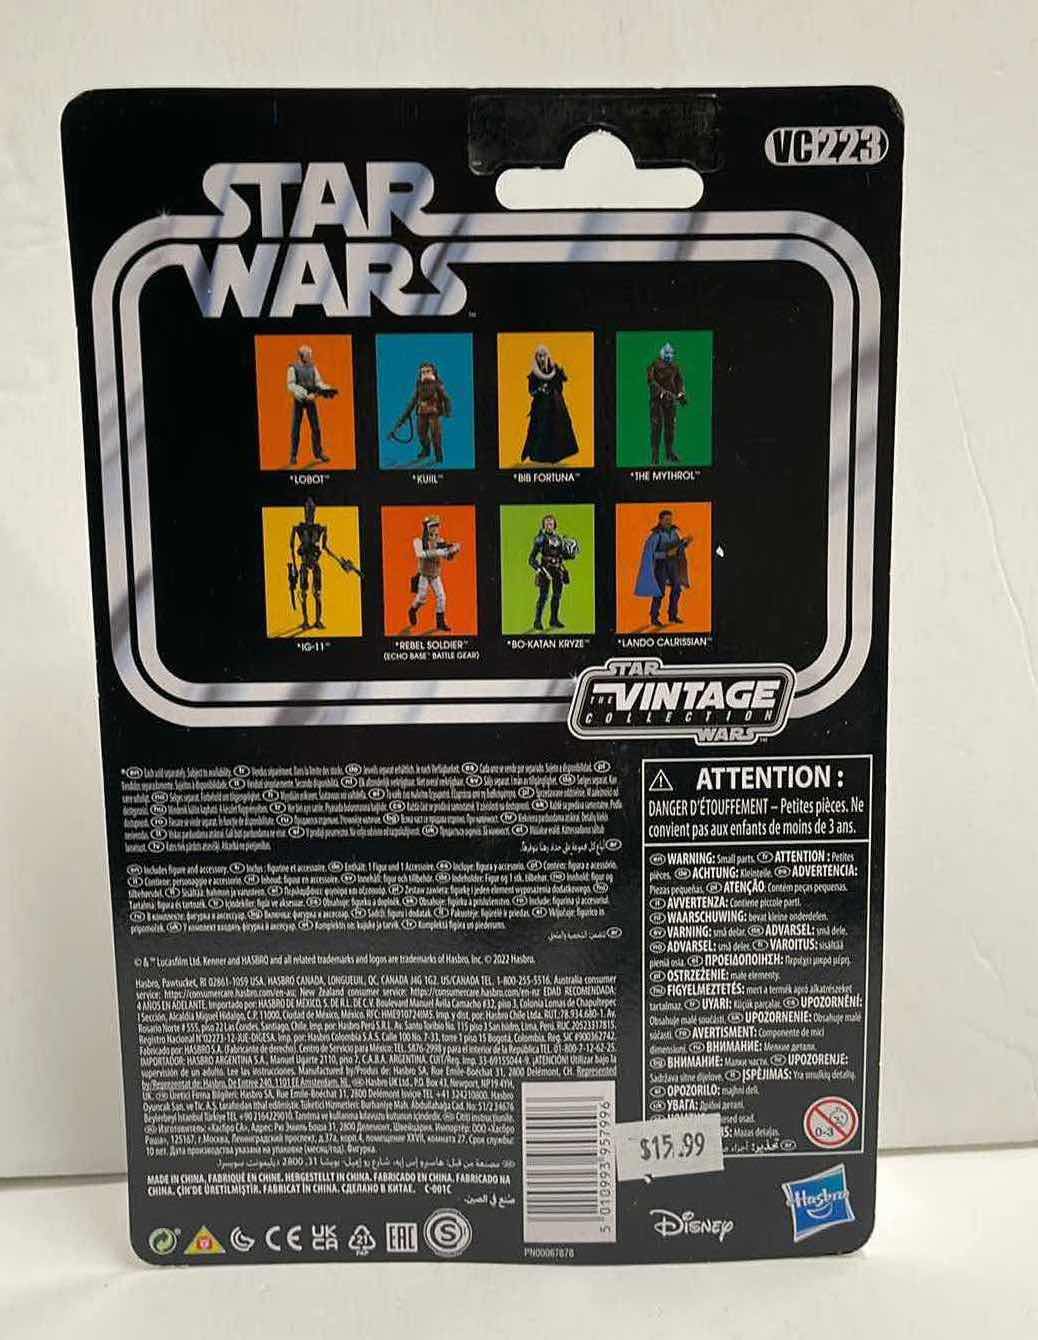 Photo 2 of NIB STAR WARS THE VINTAGE COLLECTION “LOBAT” ACTION FIGURE - RETAIL PRICE $15.99